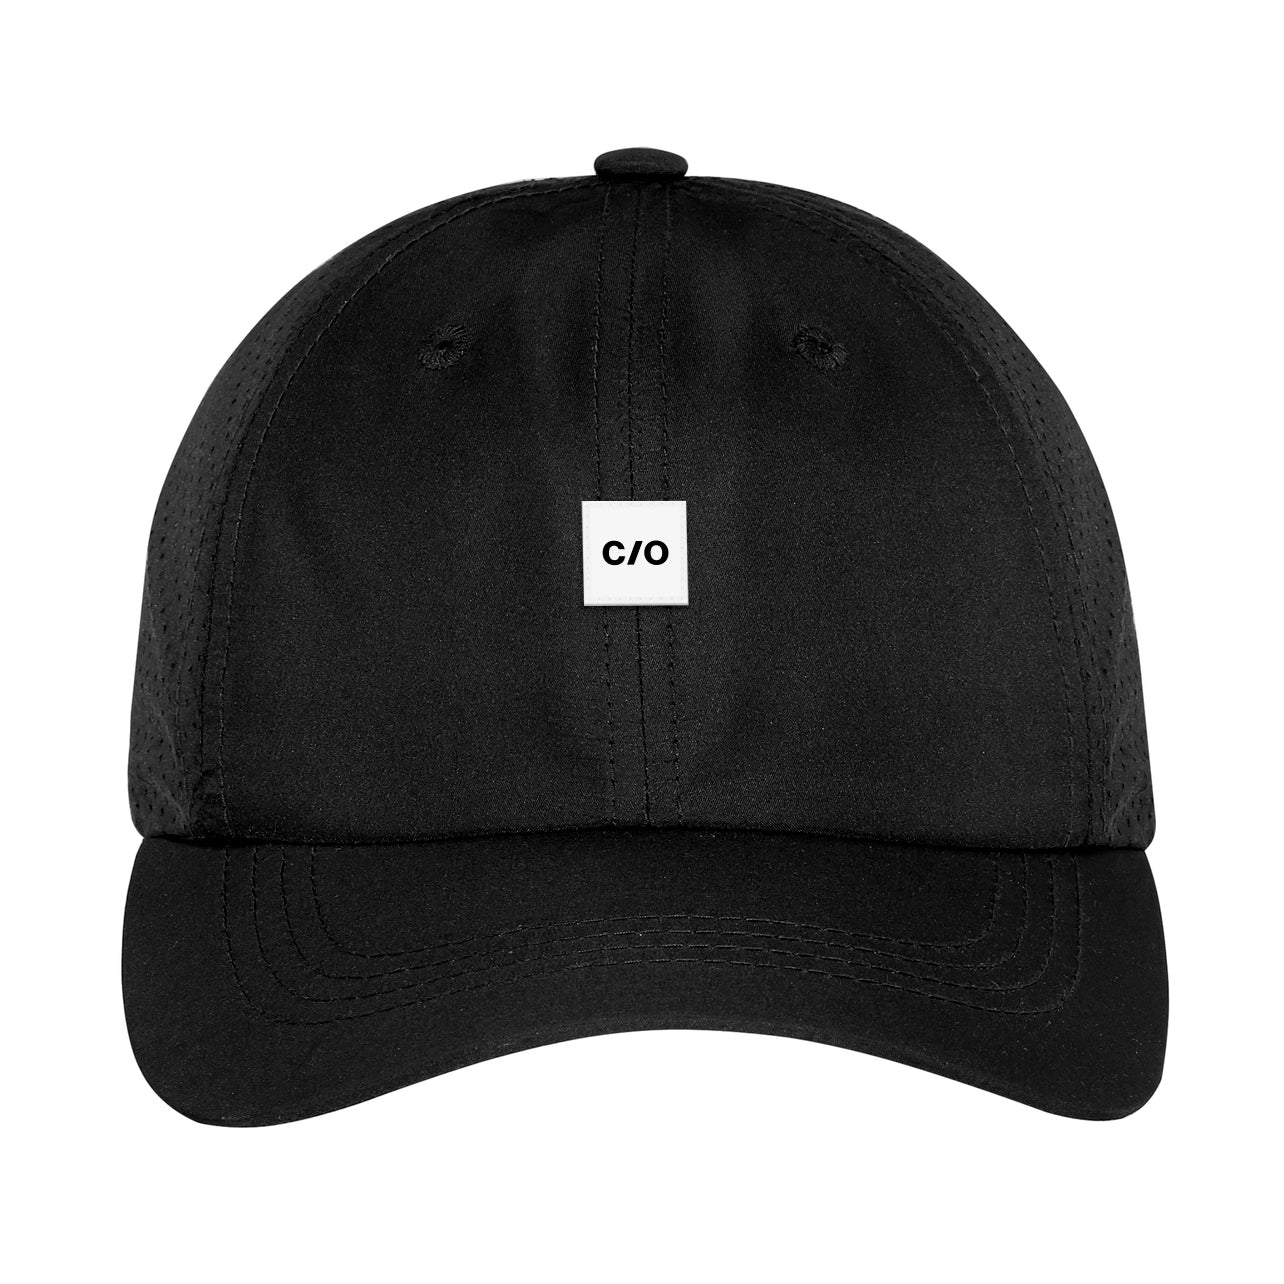 Front view of the Neue Performance Trucker Hat by Neue Supply Co. is perfect for the gym and working out in all black with perforated back panels